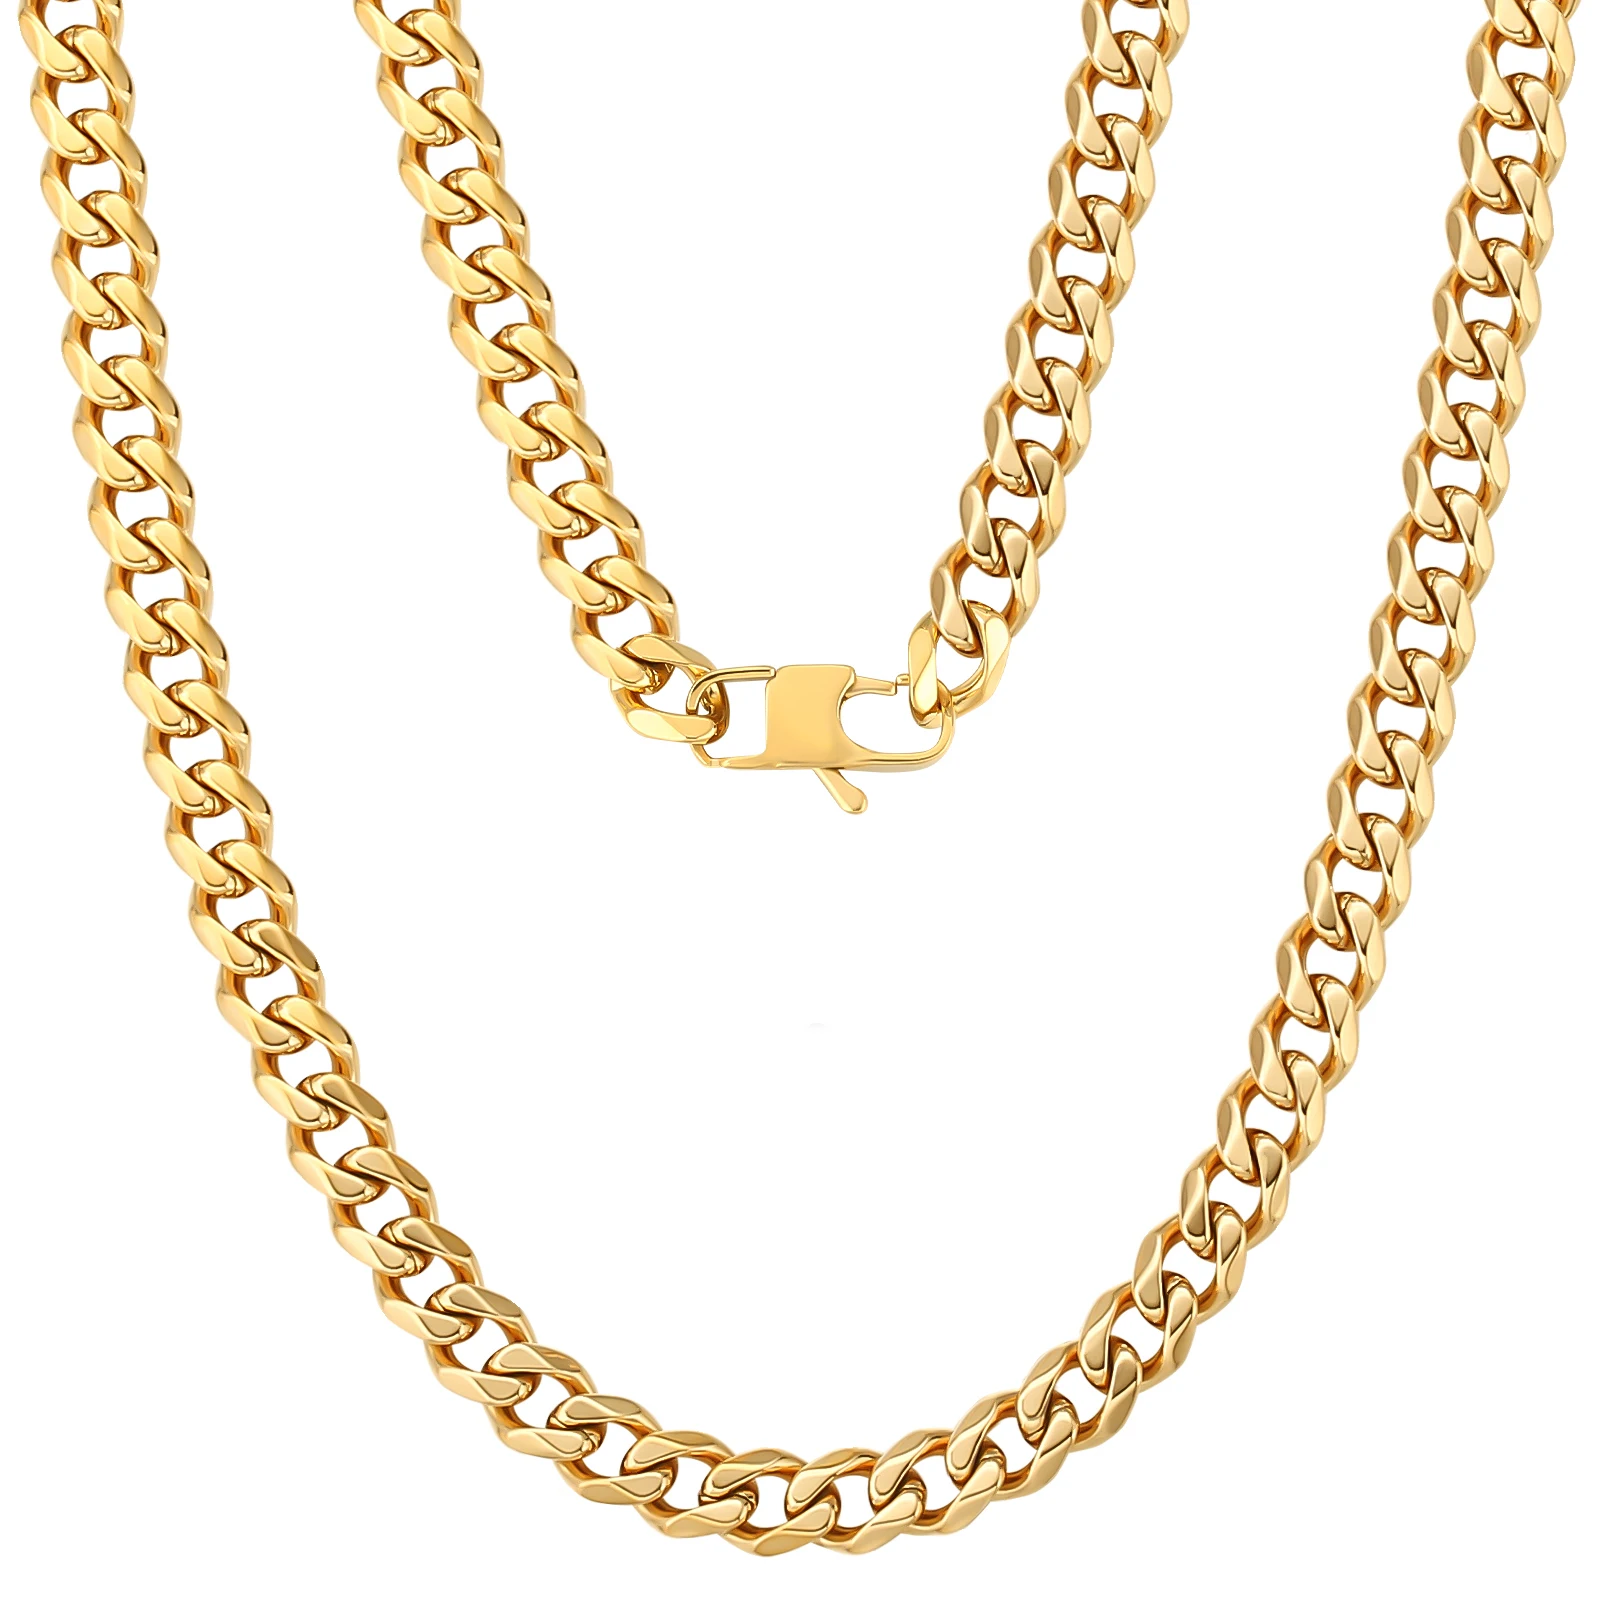 

KRKC Real Gold Plated PVD Hip Hop Jewelry 6-Side Cut 316L Stainless Steel Necklace Curb Miami Cuban Link Chain for Men Women